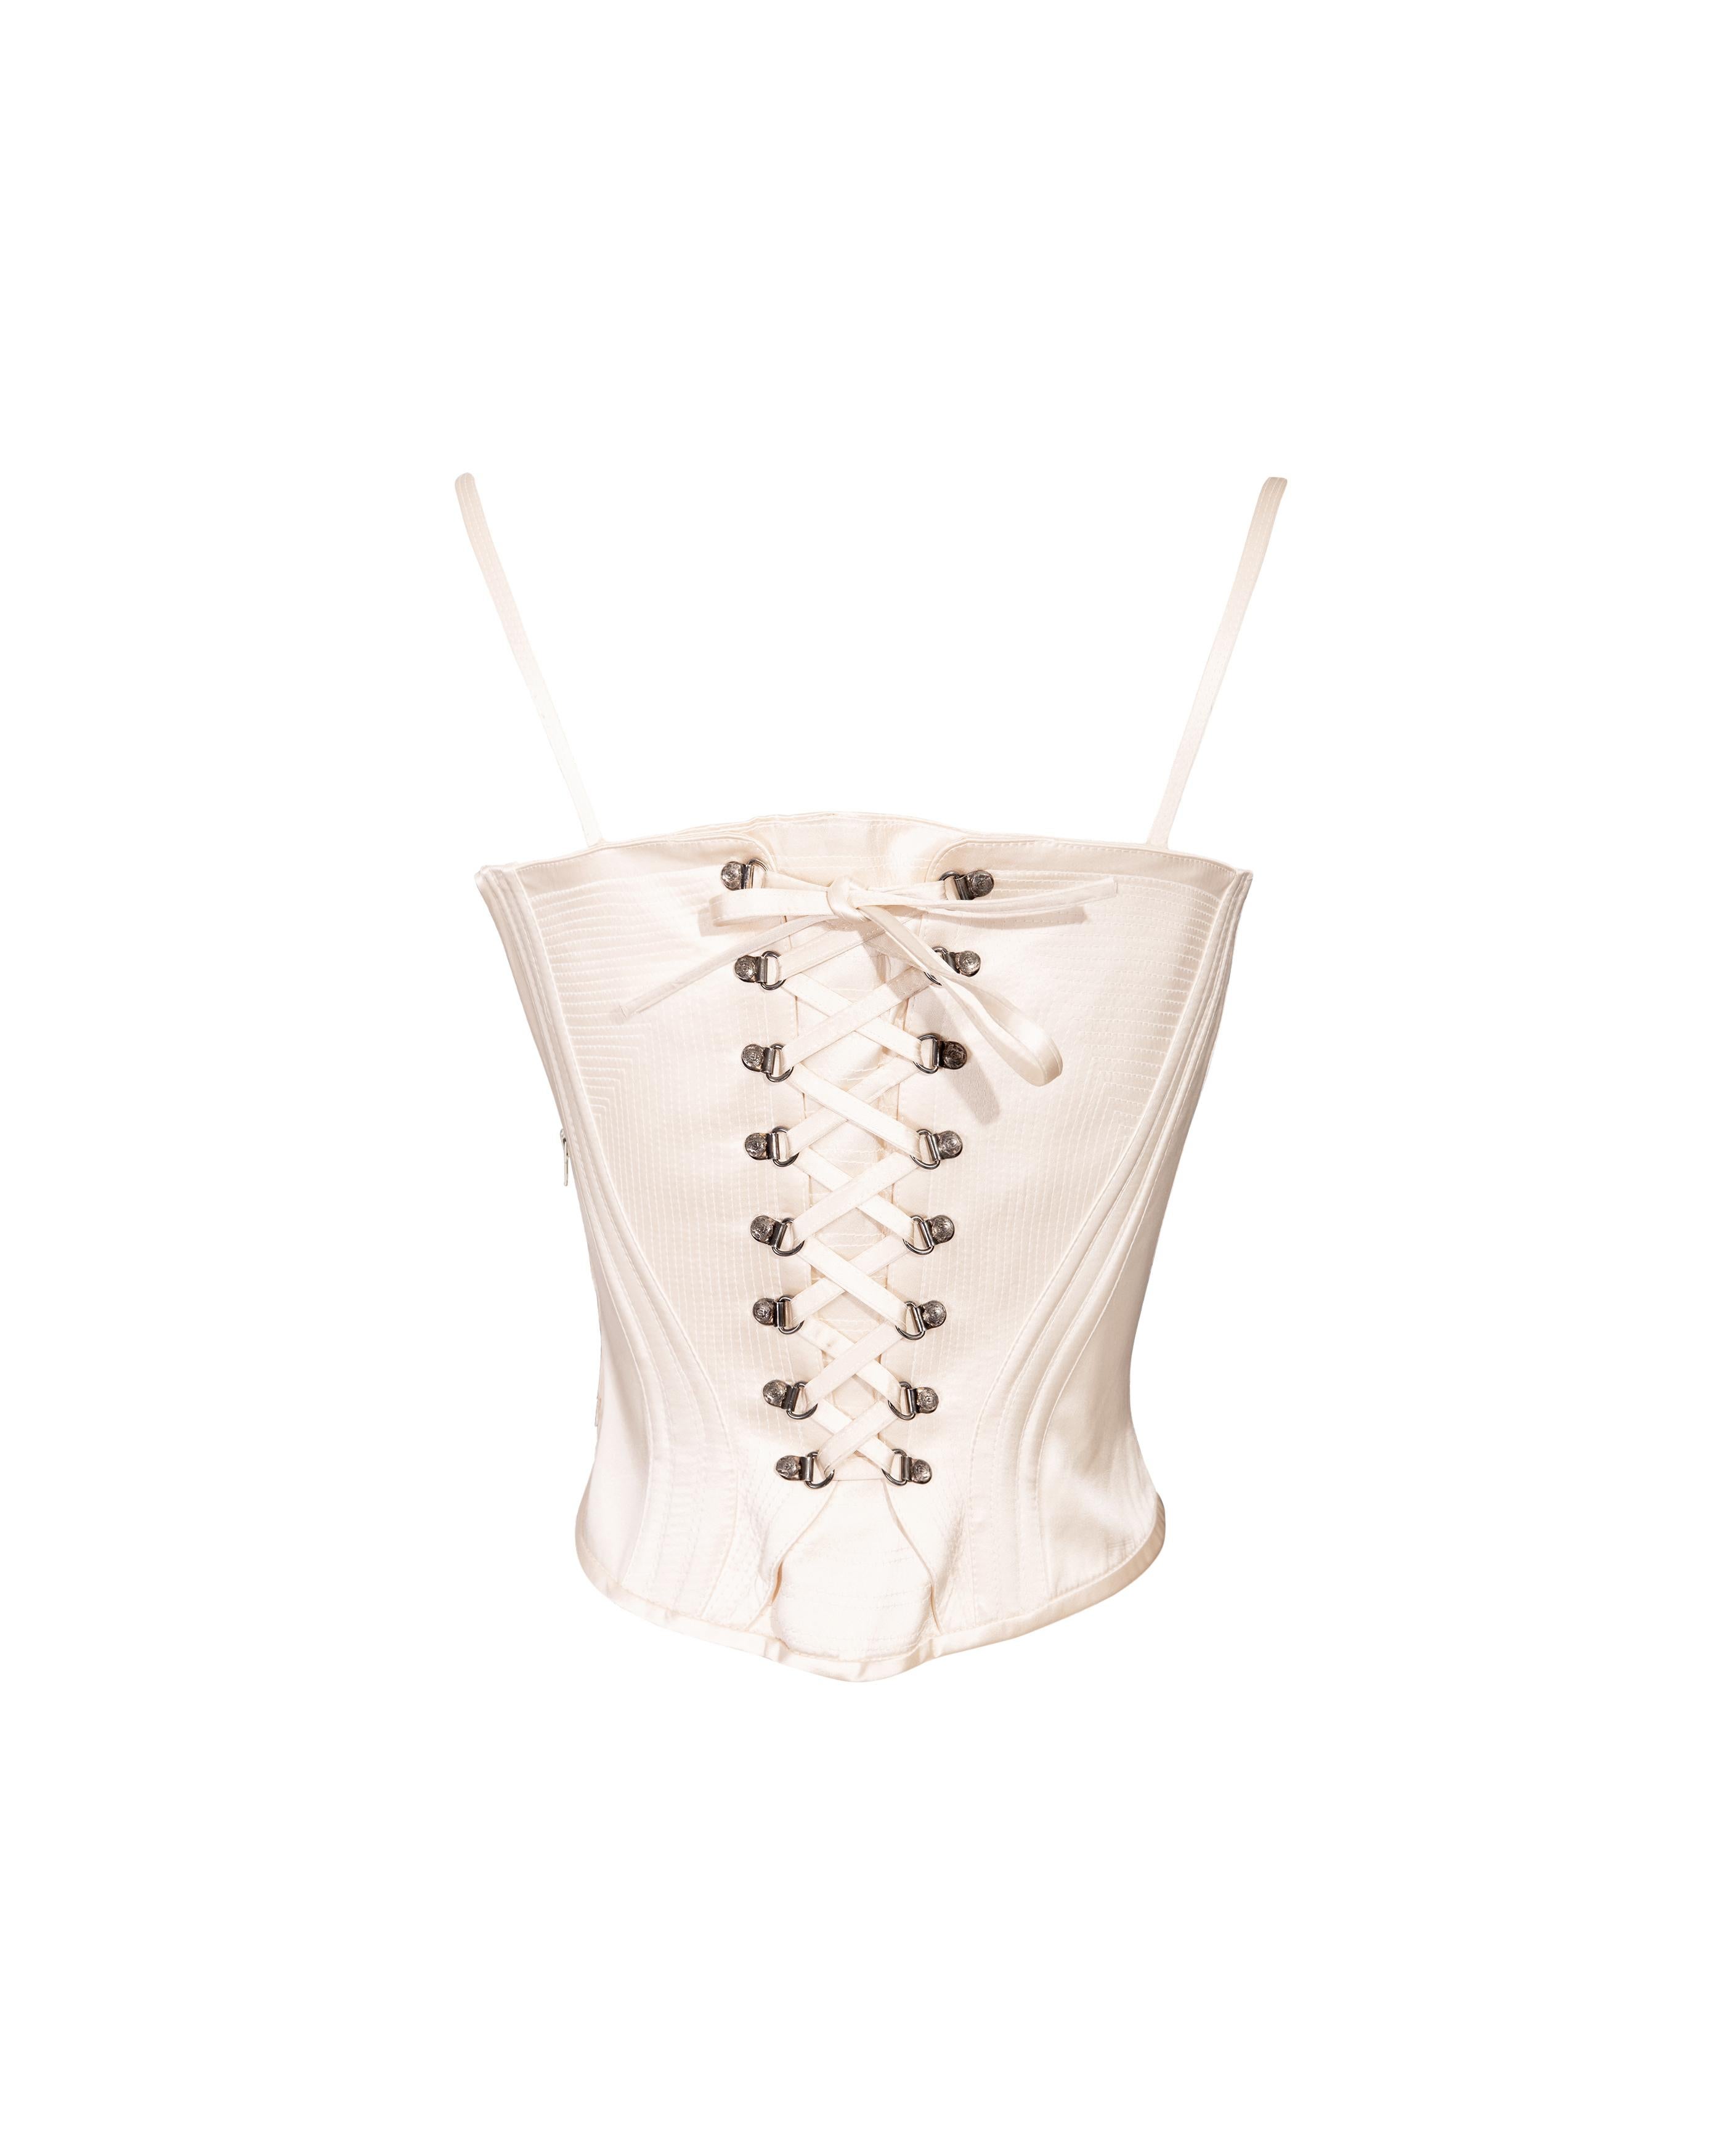 S/S 1995 Gianni Versace Ecru Lace-up Corset Top In Excellent Condition In North Hollywood, CA